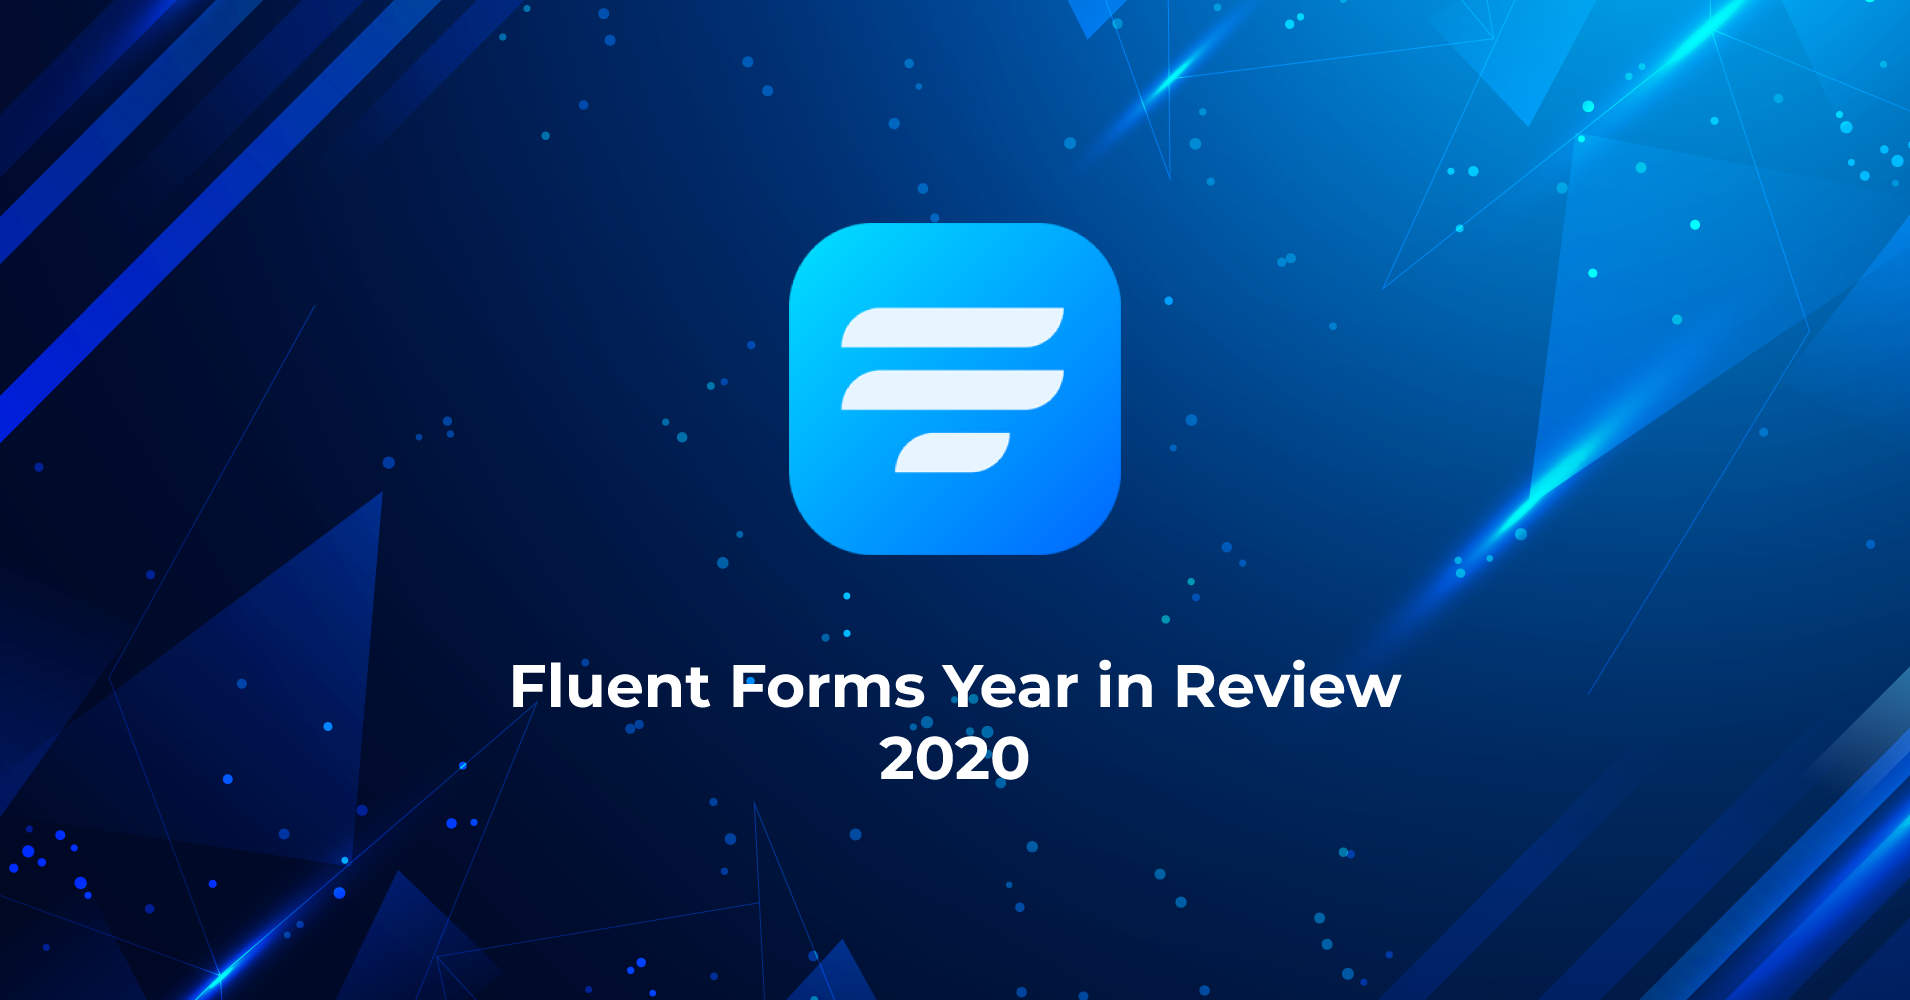 Fluent Forms Year in Review